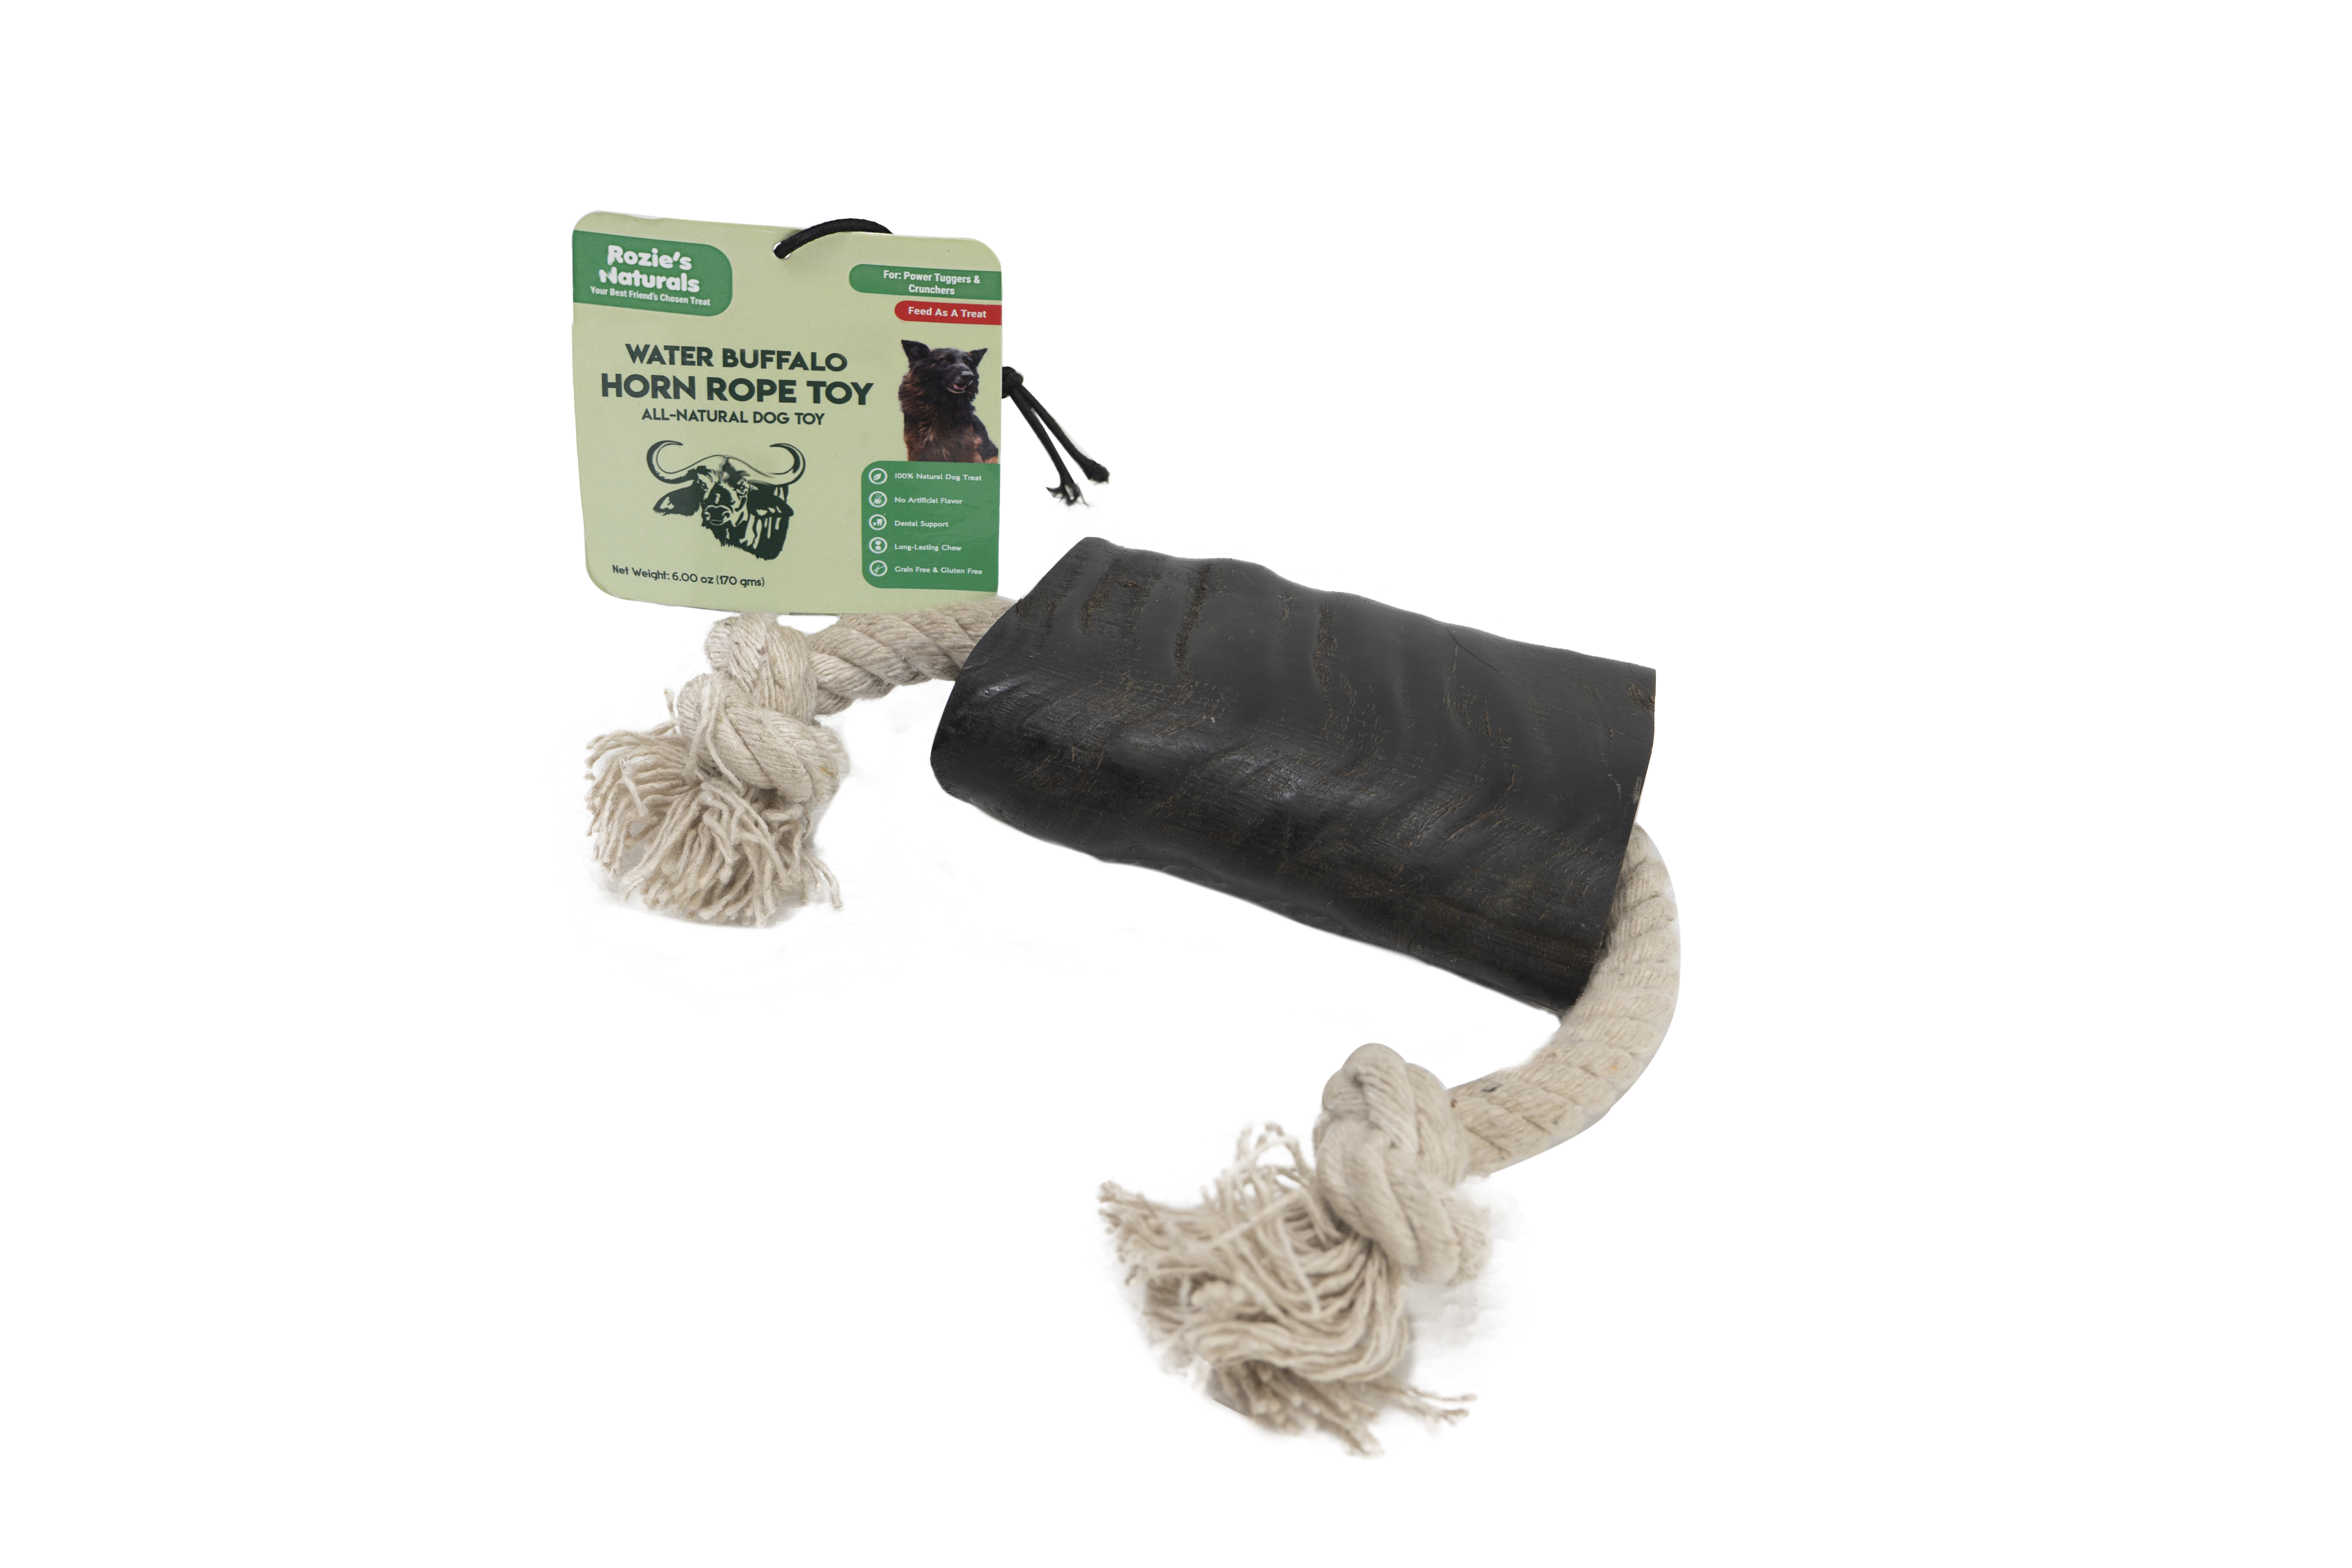 WATER BUFFALO HORN ROPE TUG TOY- 100% Cotton Rope 14", Long-Lasting, Natural Dog Treat & Chews, Dog Dental Chew Toy-2 COUNT-12 oz - image 4 of 9